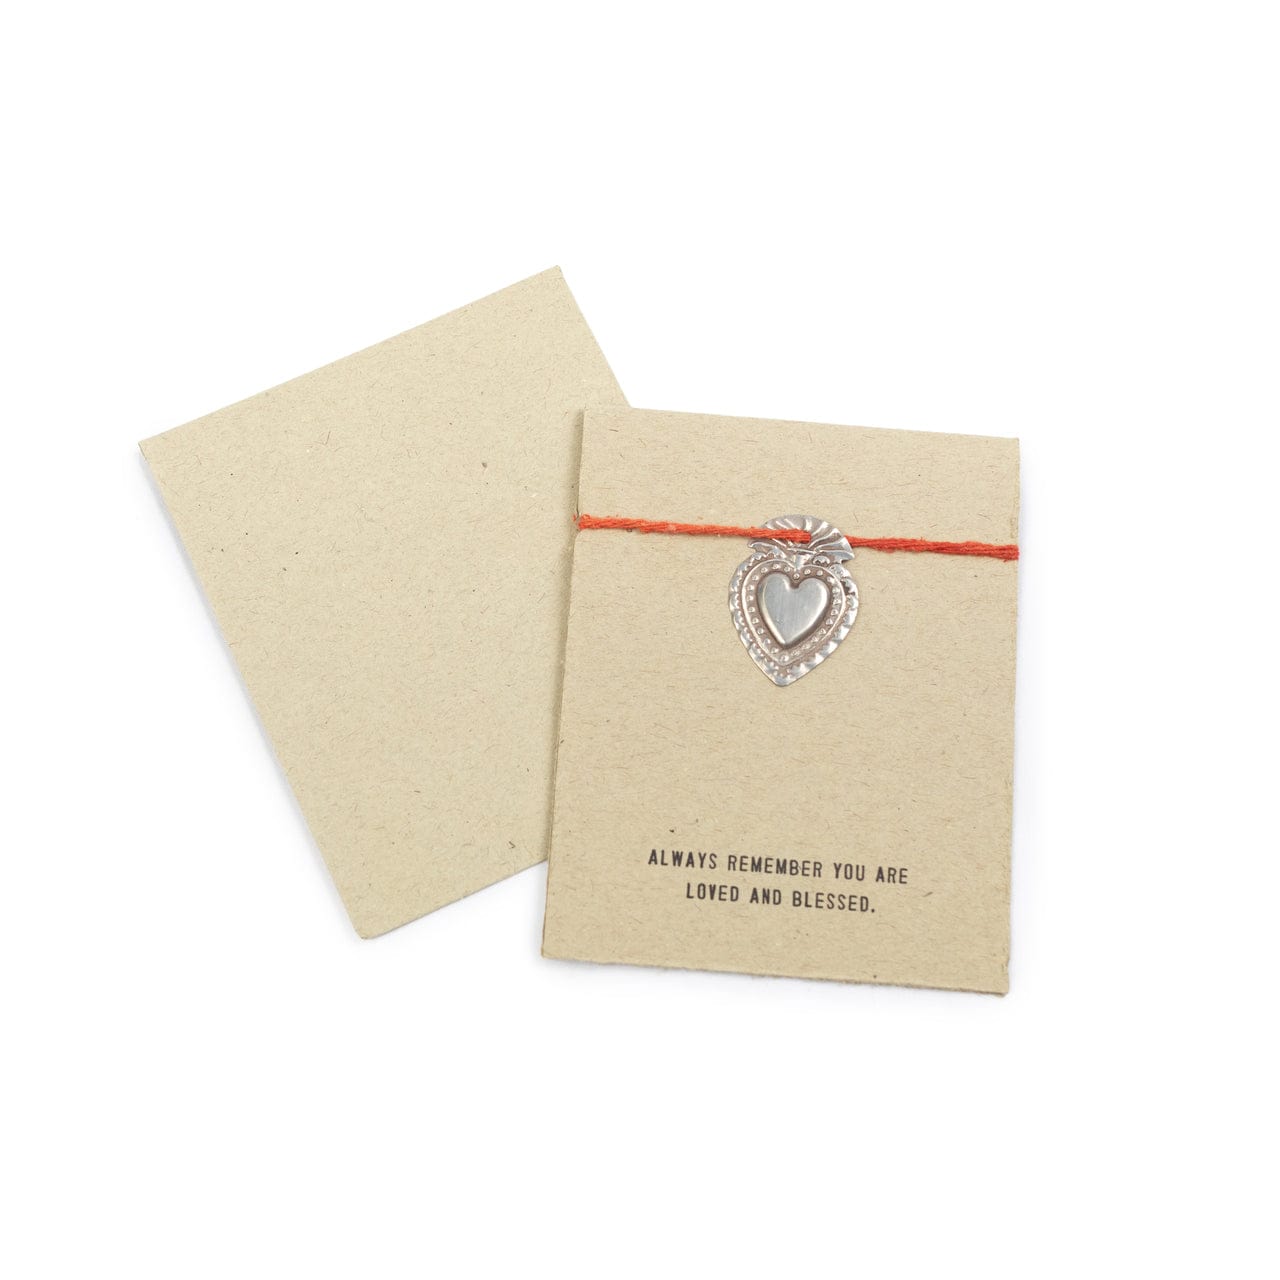 Milagro Heart Cards Sugarboo Designs Greeting Card remember